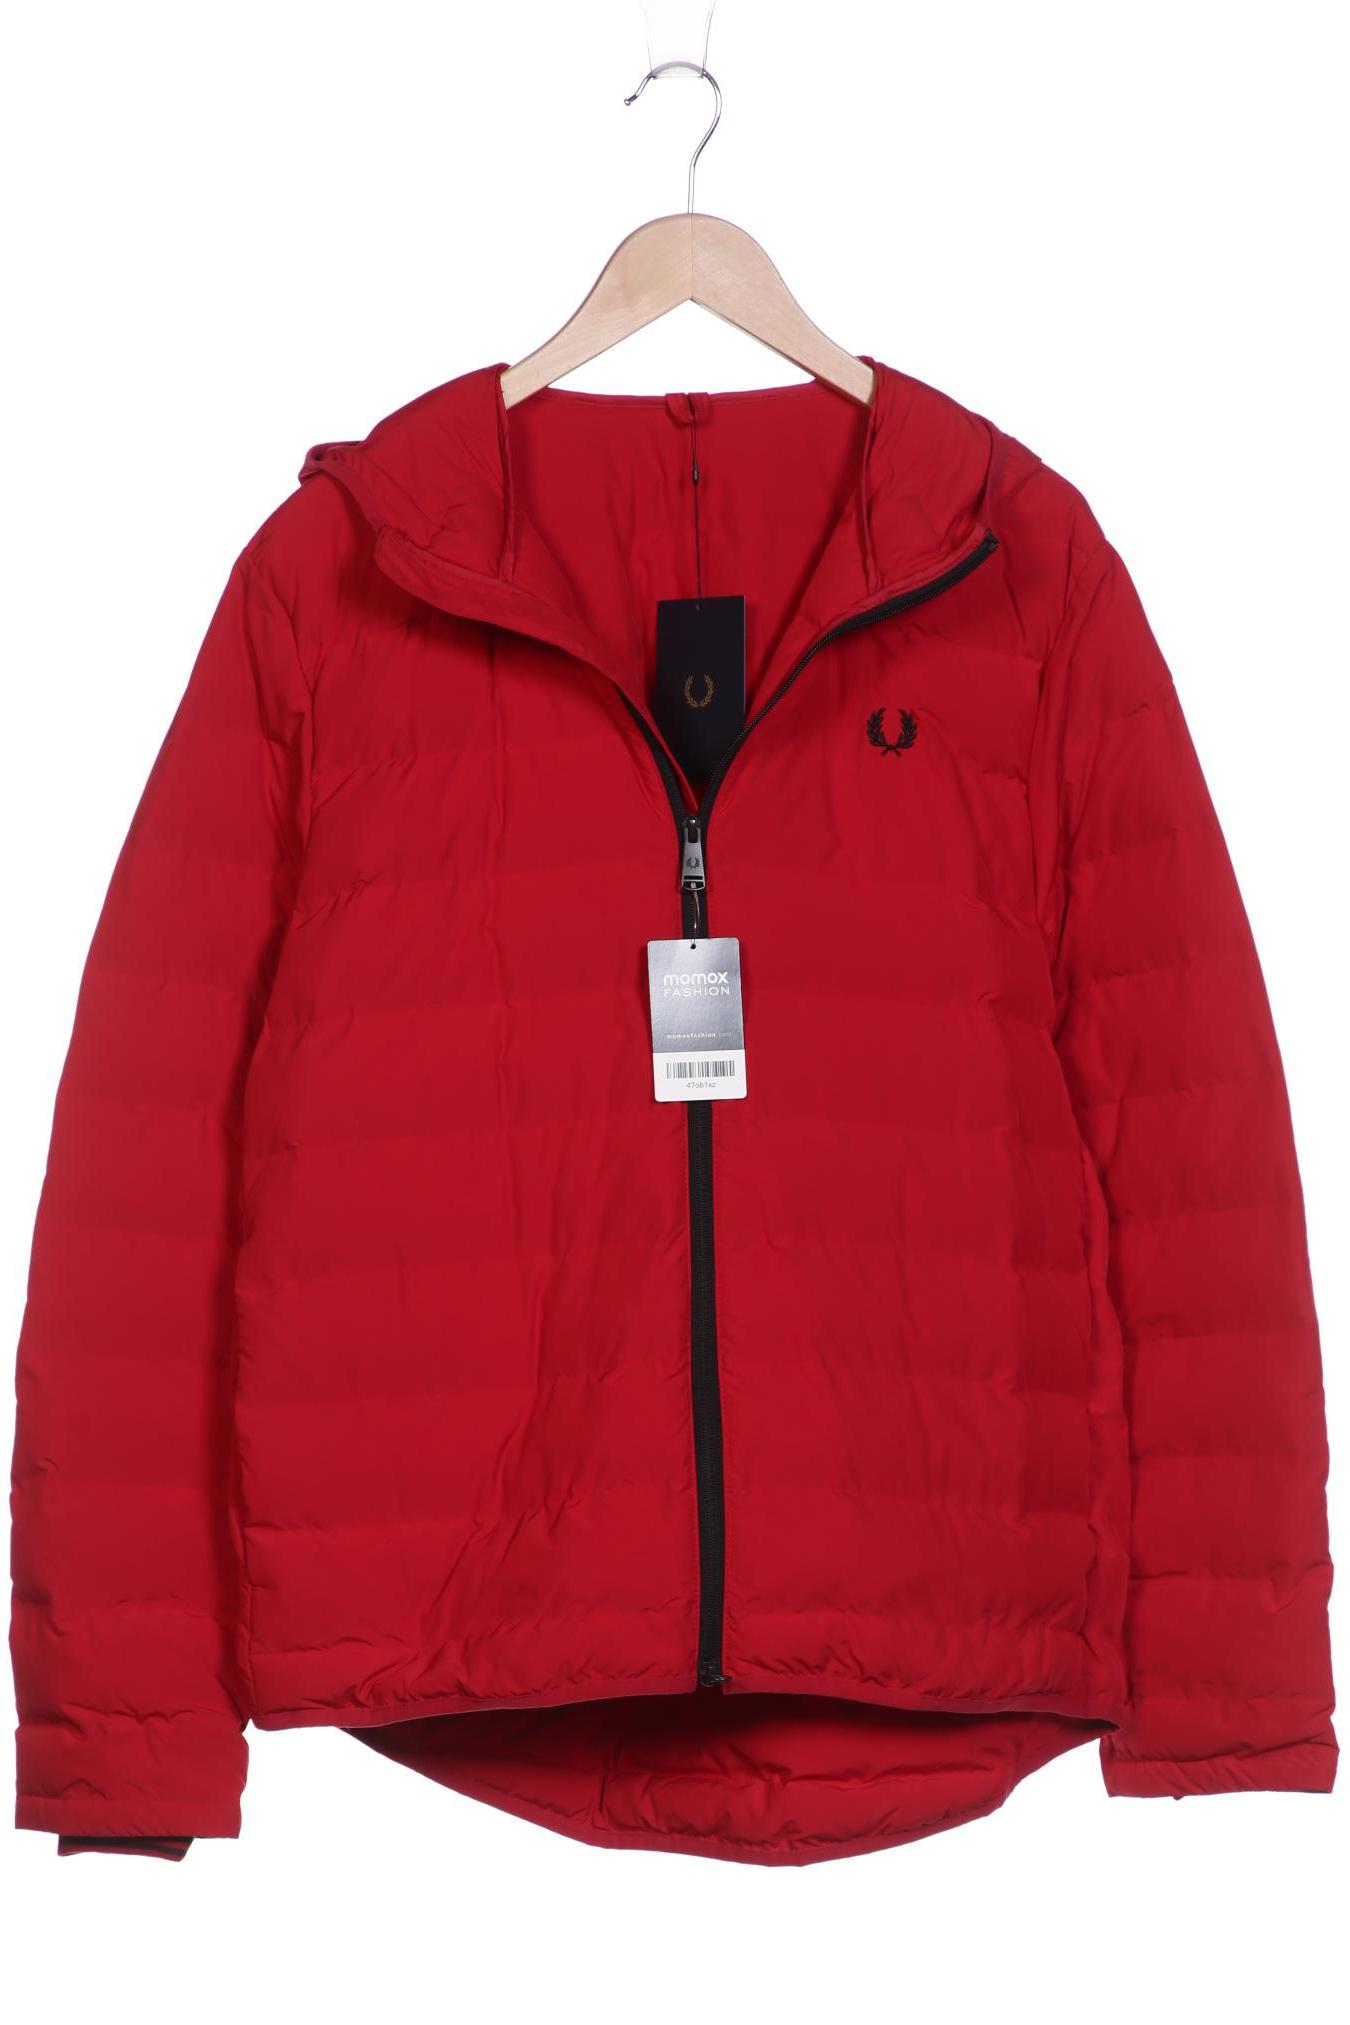 Fred Perry Herren Jacke, rot von Fred Perry